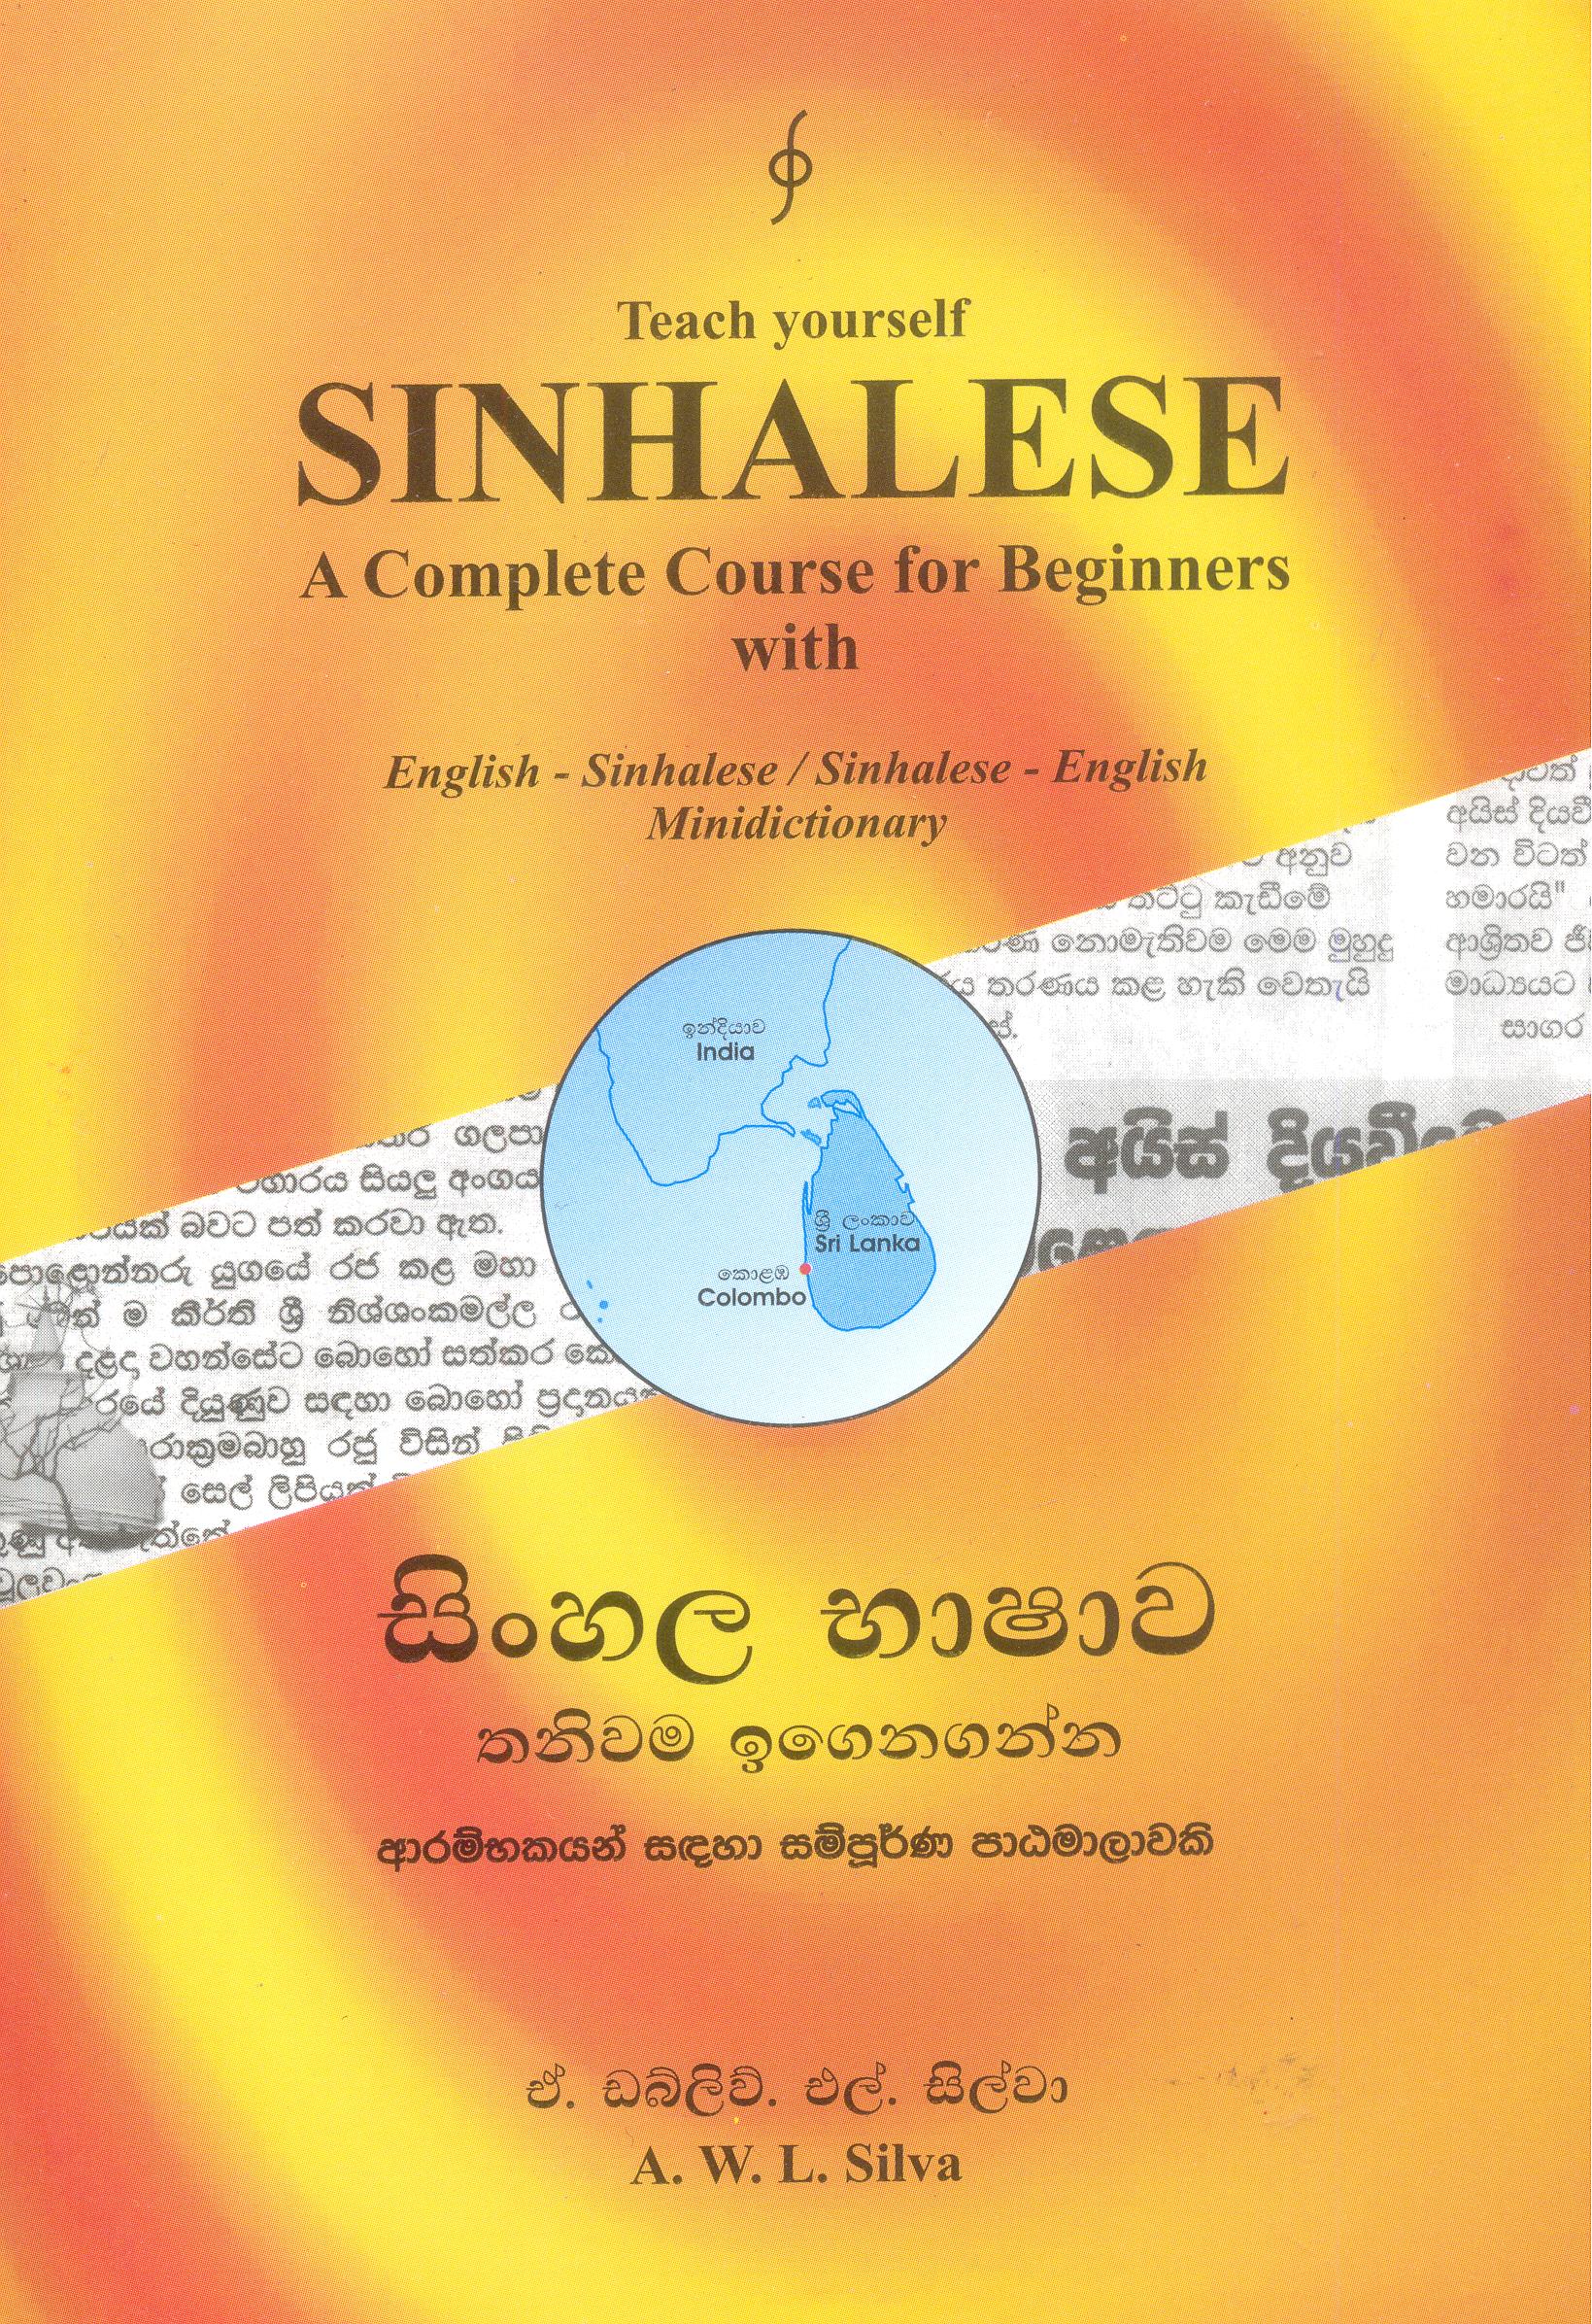 Teach Yourself Sinhalese : A Complete Course For Beginners (5th Edition)